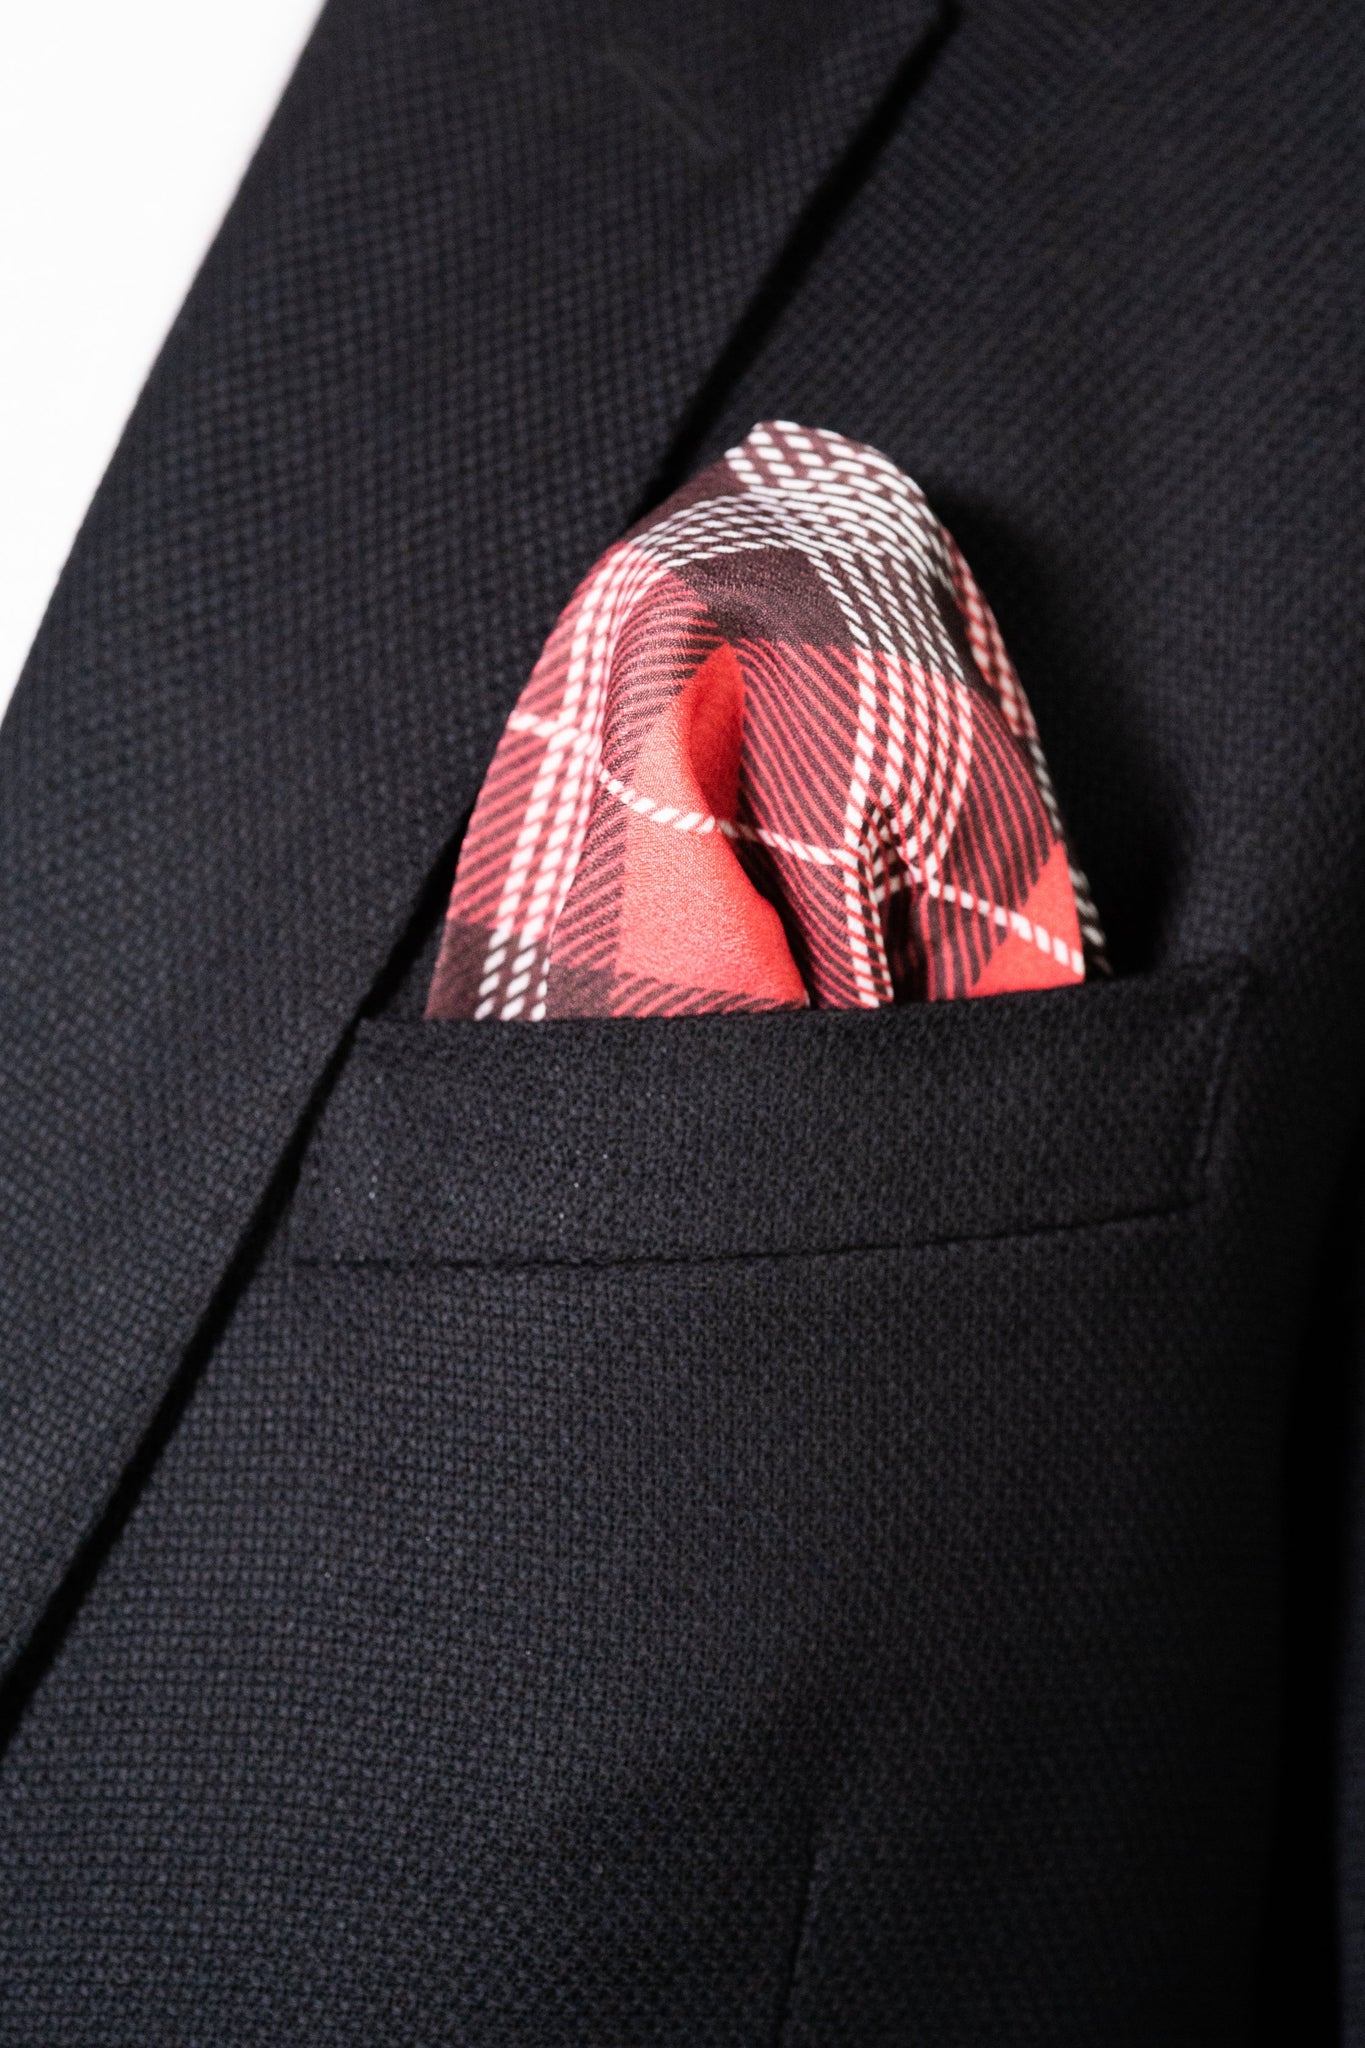 RARE CUT's Sleigh Bells Ring Pocket Square Worn in a Sports Jacket